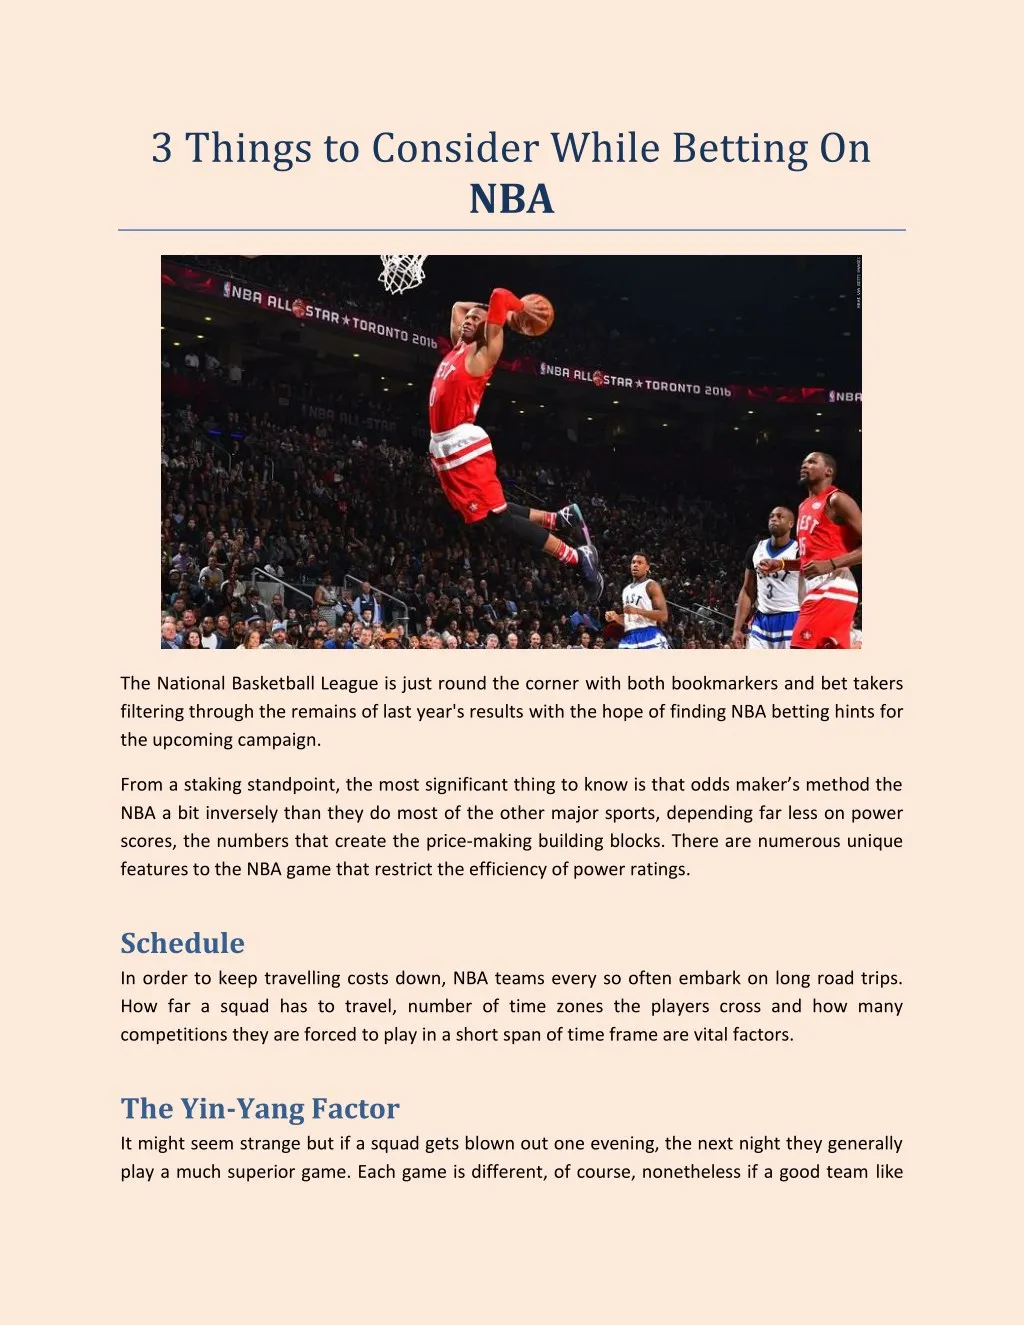 3 things to consider while betting on nba